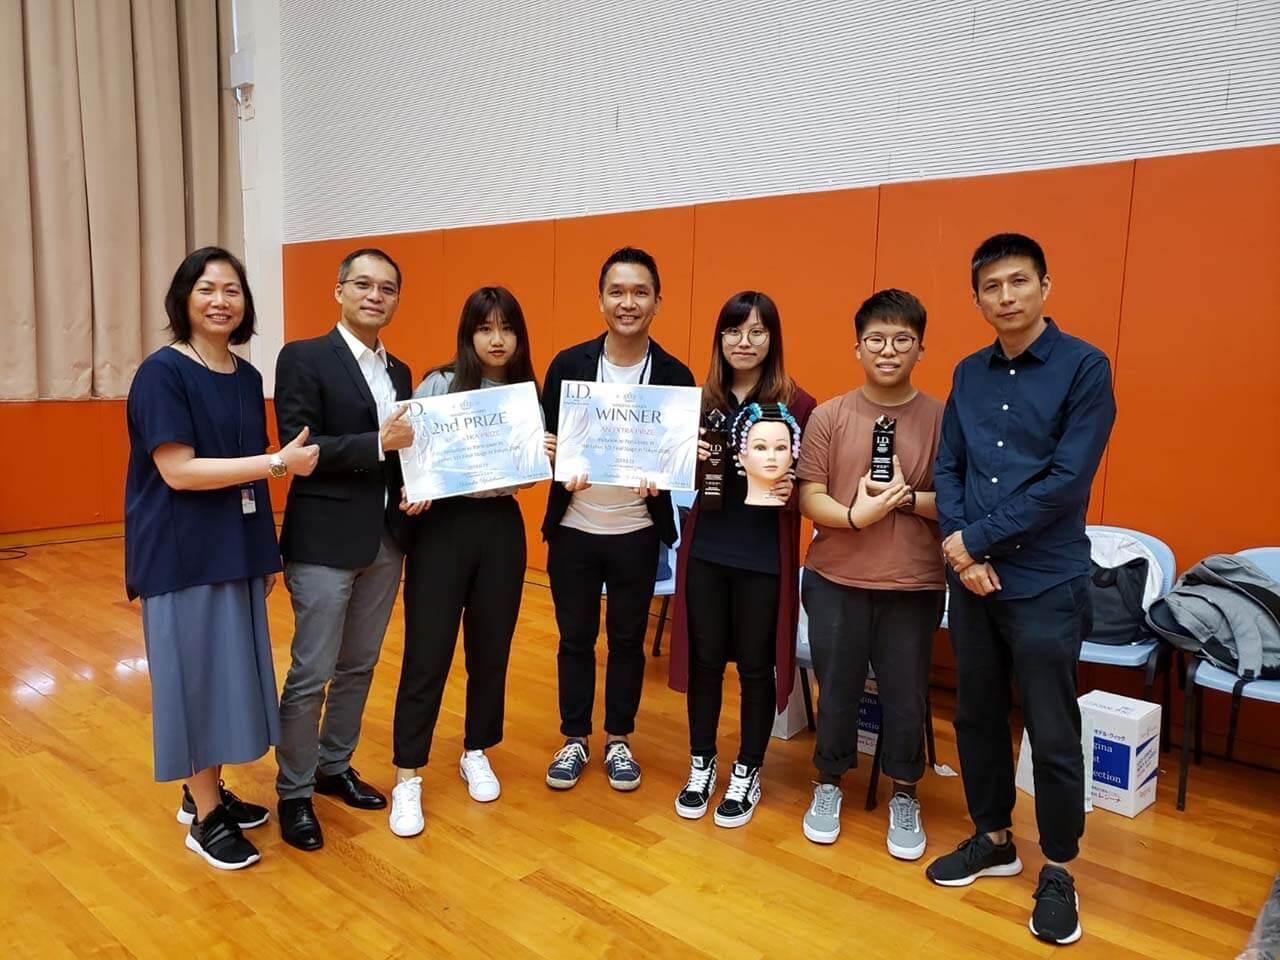 A group photo of the award-winning students and the teacher